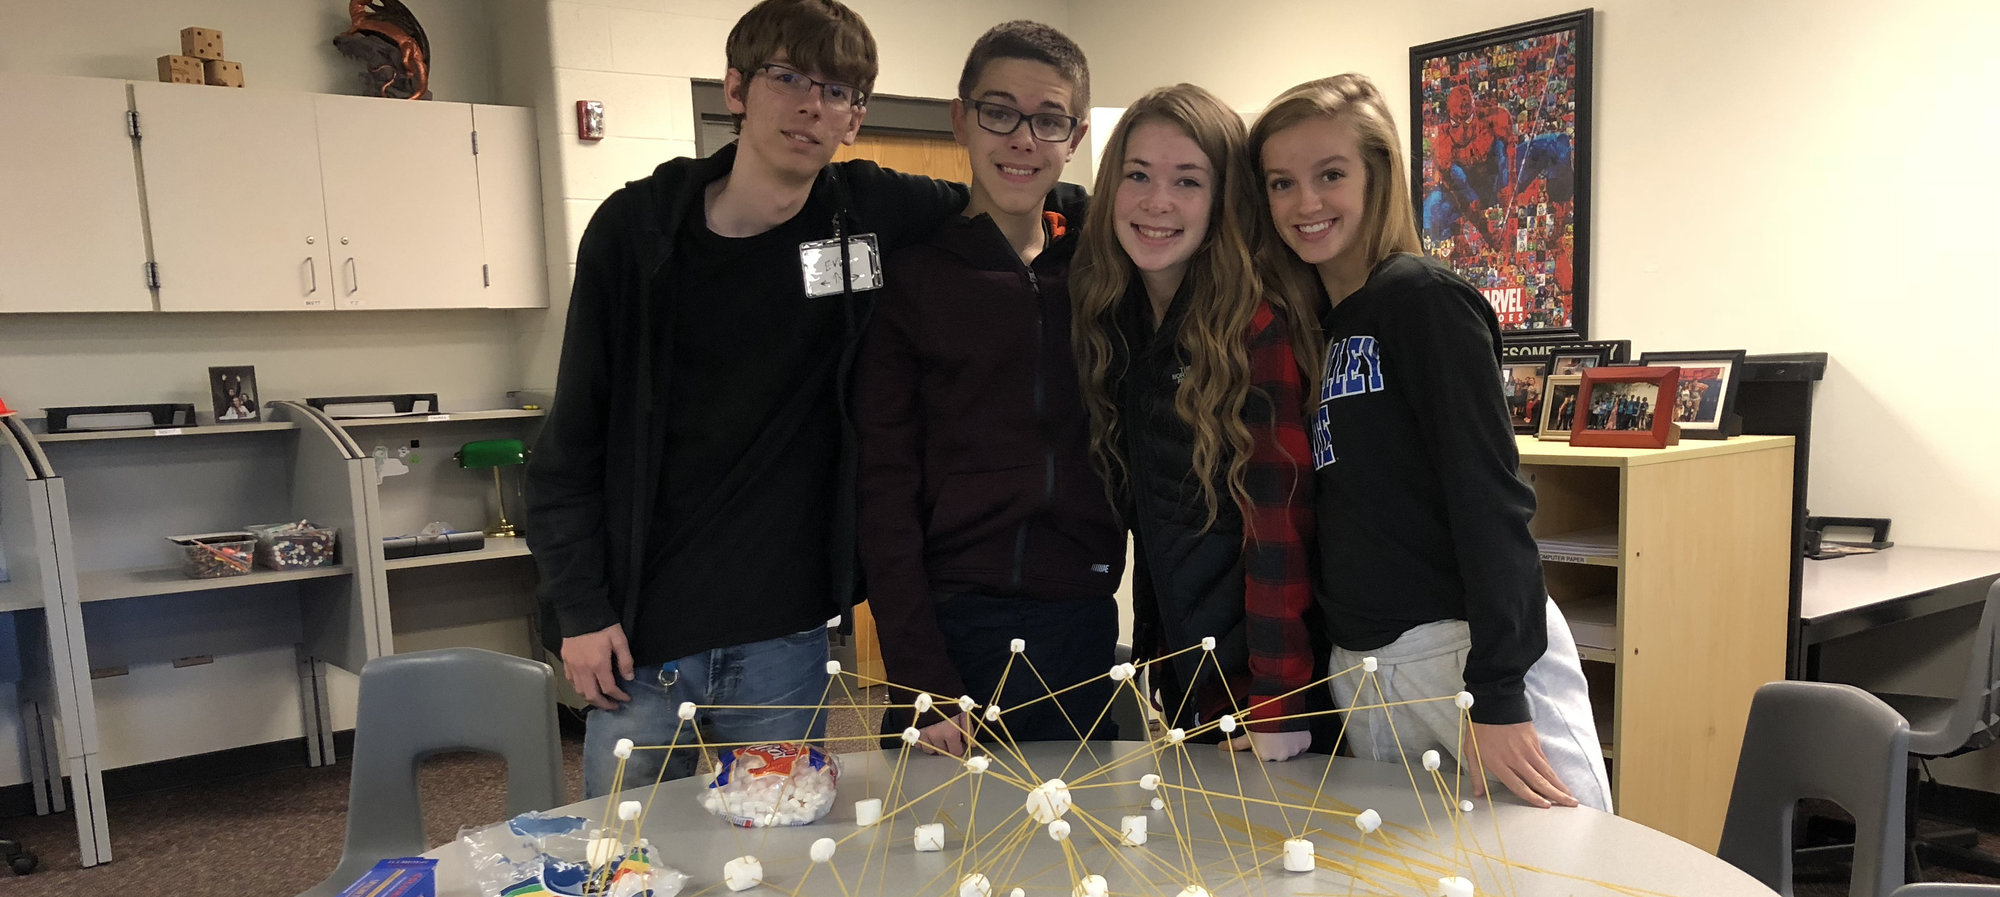 Marshmallow structures with LIFT students